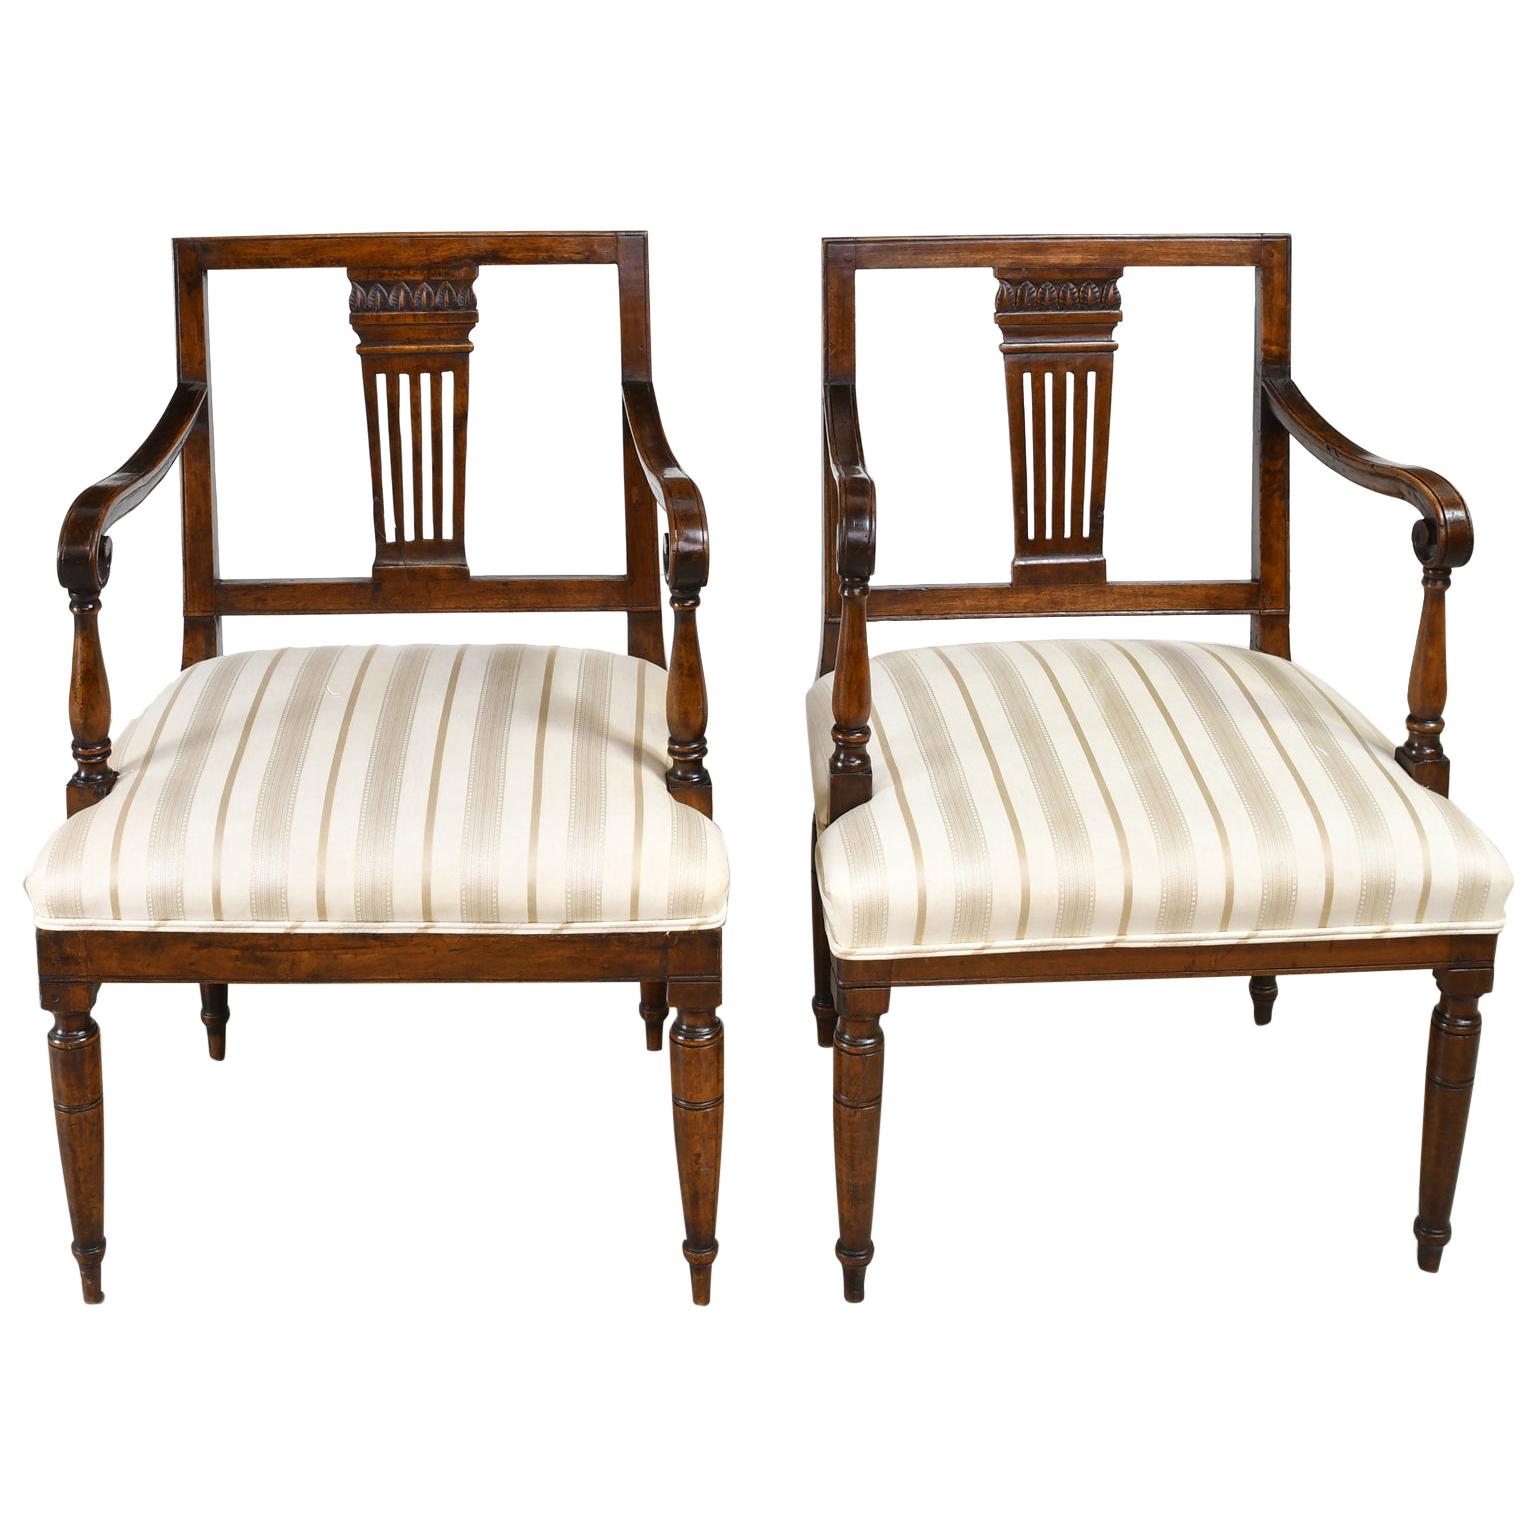 Pair of Italian Neoclassical Armchairs in Walnut w/ Upholstered Seat, circa 1820